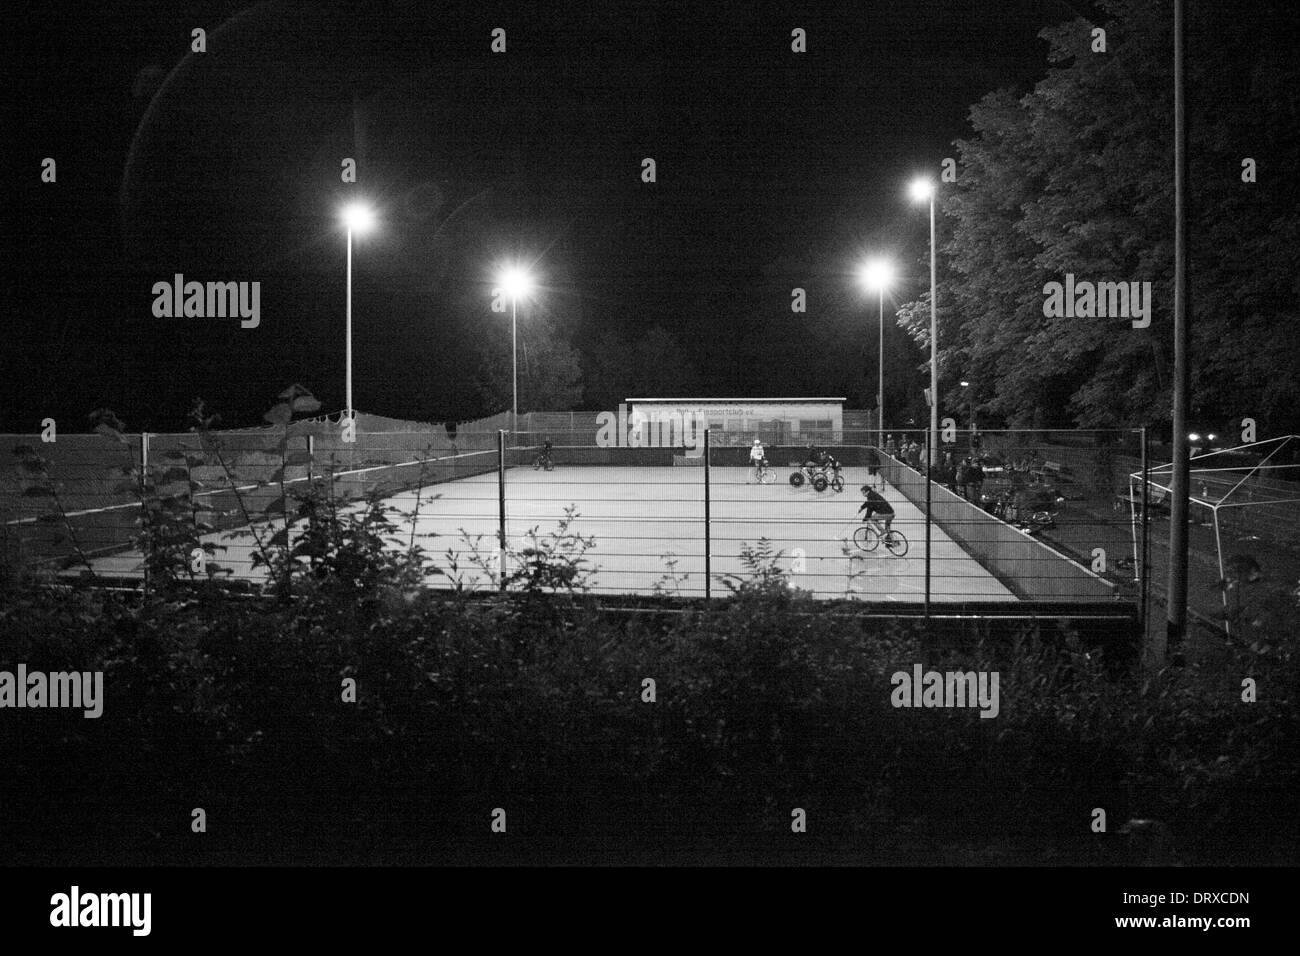 Black and White night photo of an outdoor cement court. Stock Photo